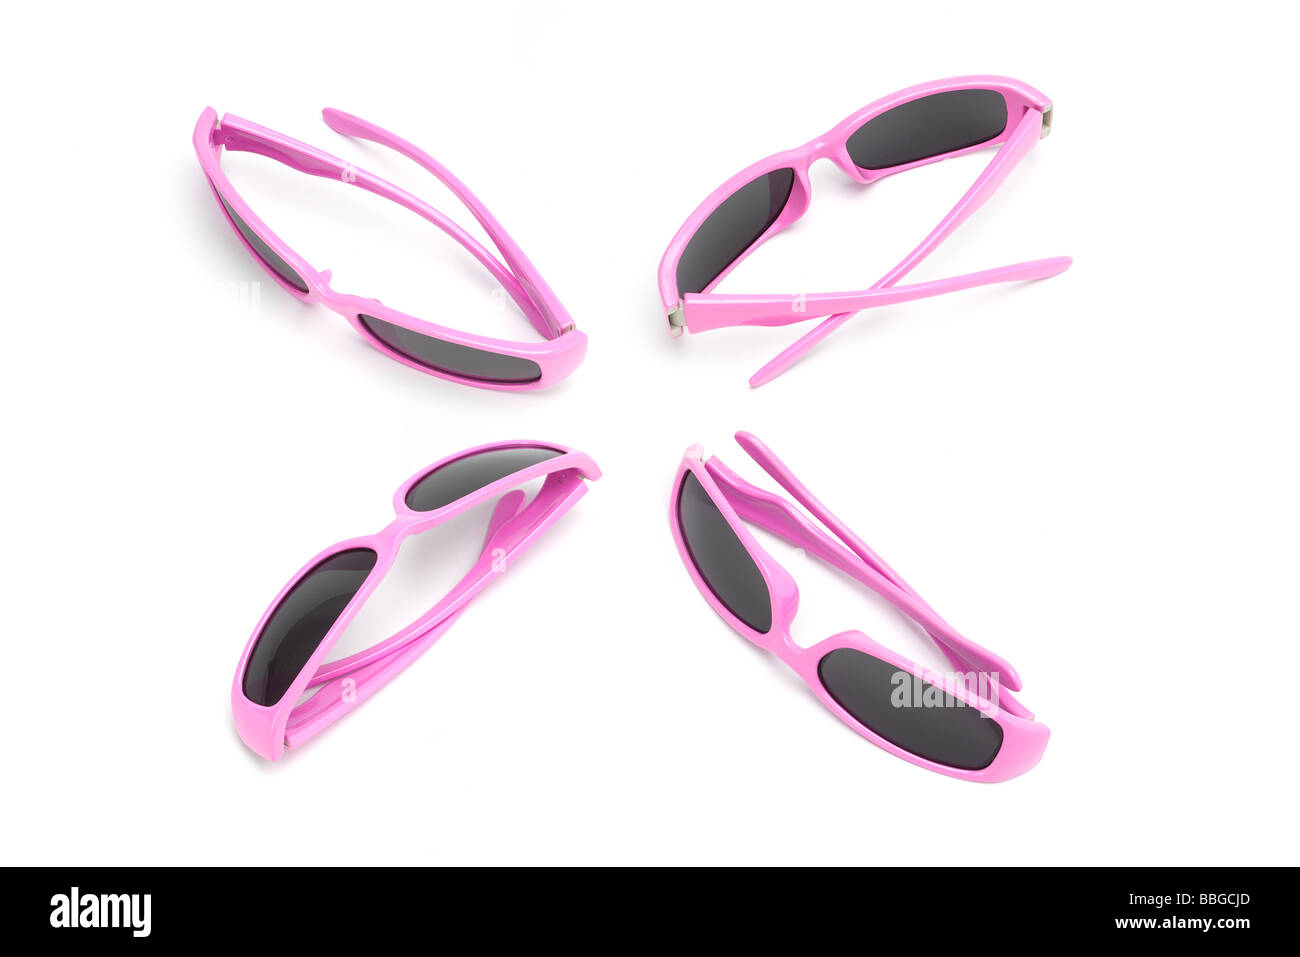 Four pairs of toy sunglasses arranged on white background Stock Photo